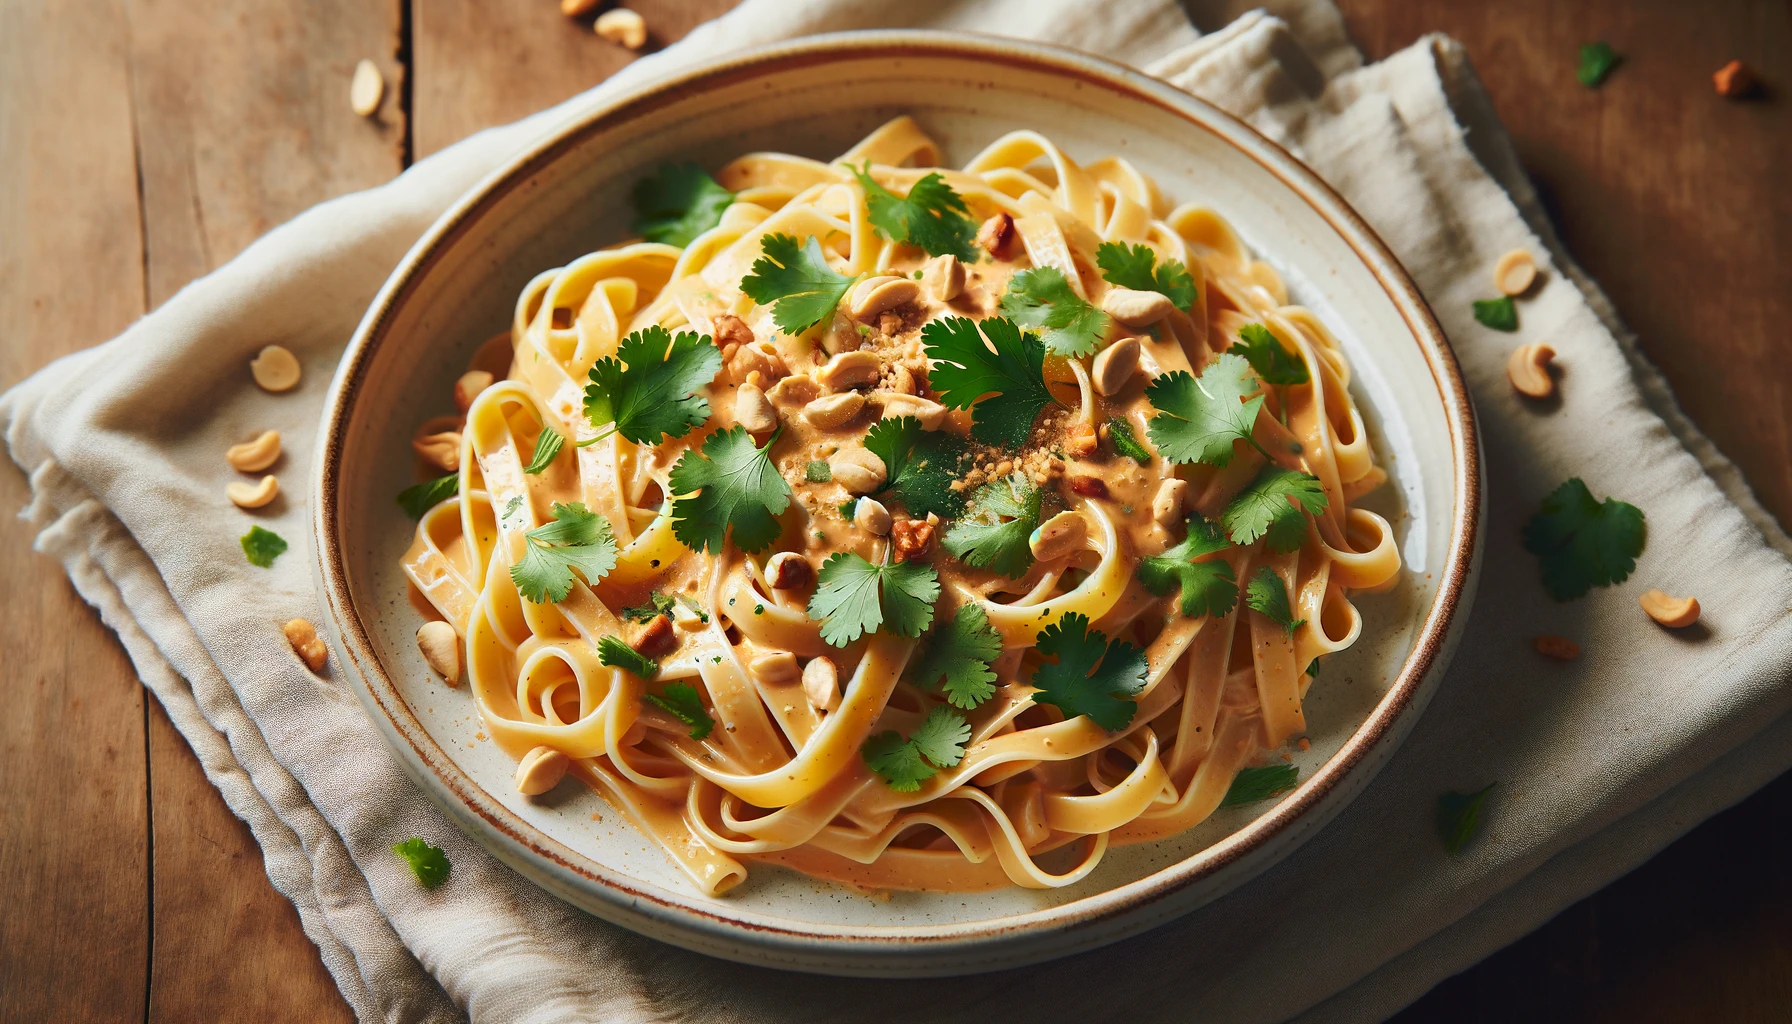 This fusion recipe combines Thai flavors with the classic Alfredo dish. The creaminess of the Alfredo sauce works wonderfully with the pad Thai sauce garnished with peanuts and cilantro. This is a simple and easy dish packed with flavors that the whole family will enjoy.